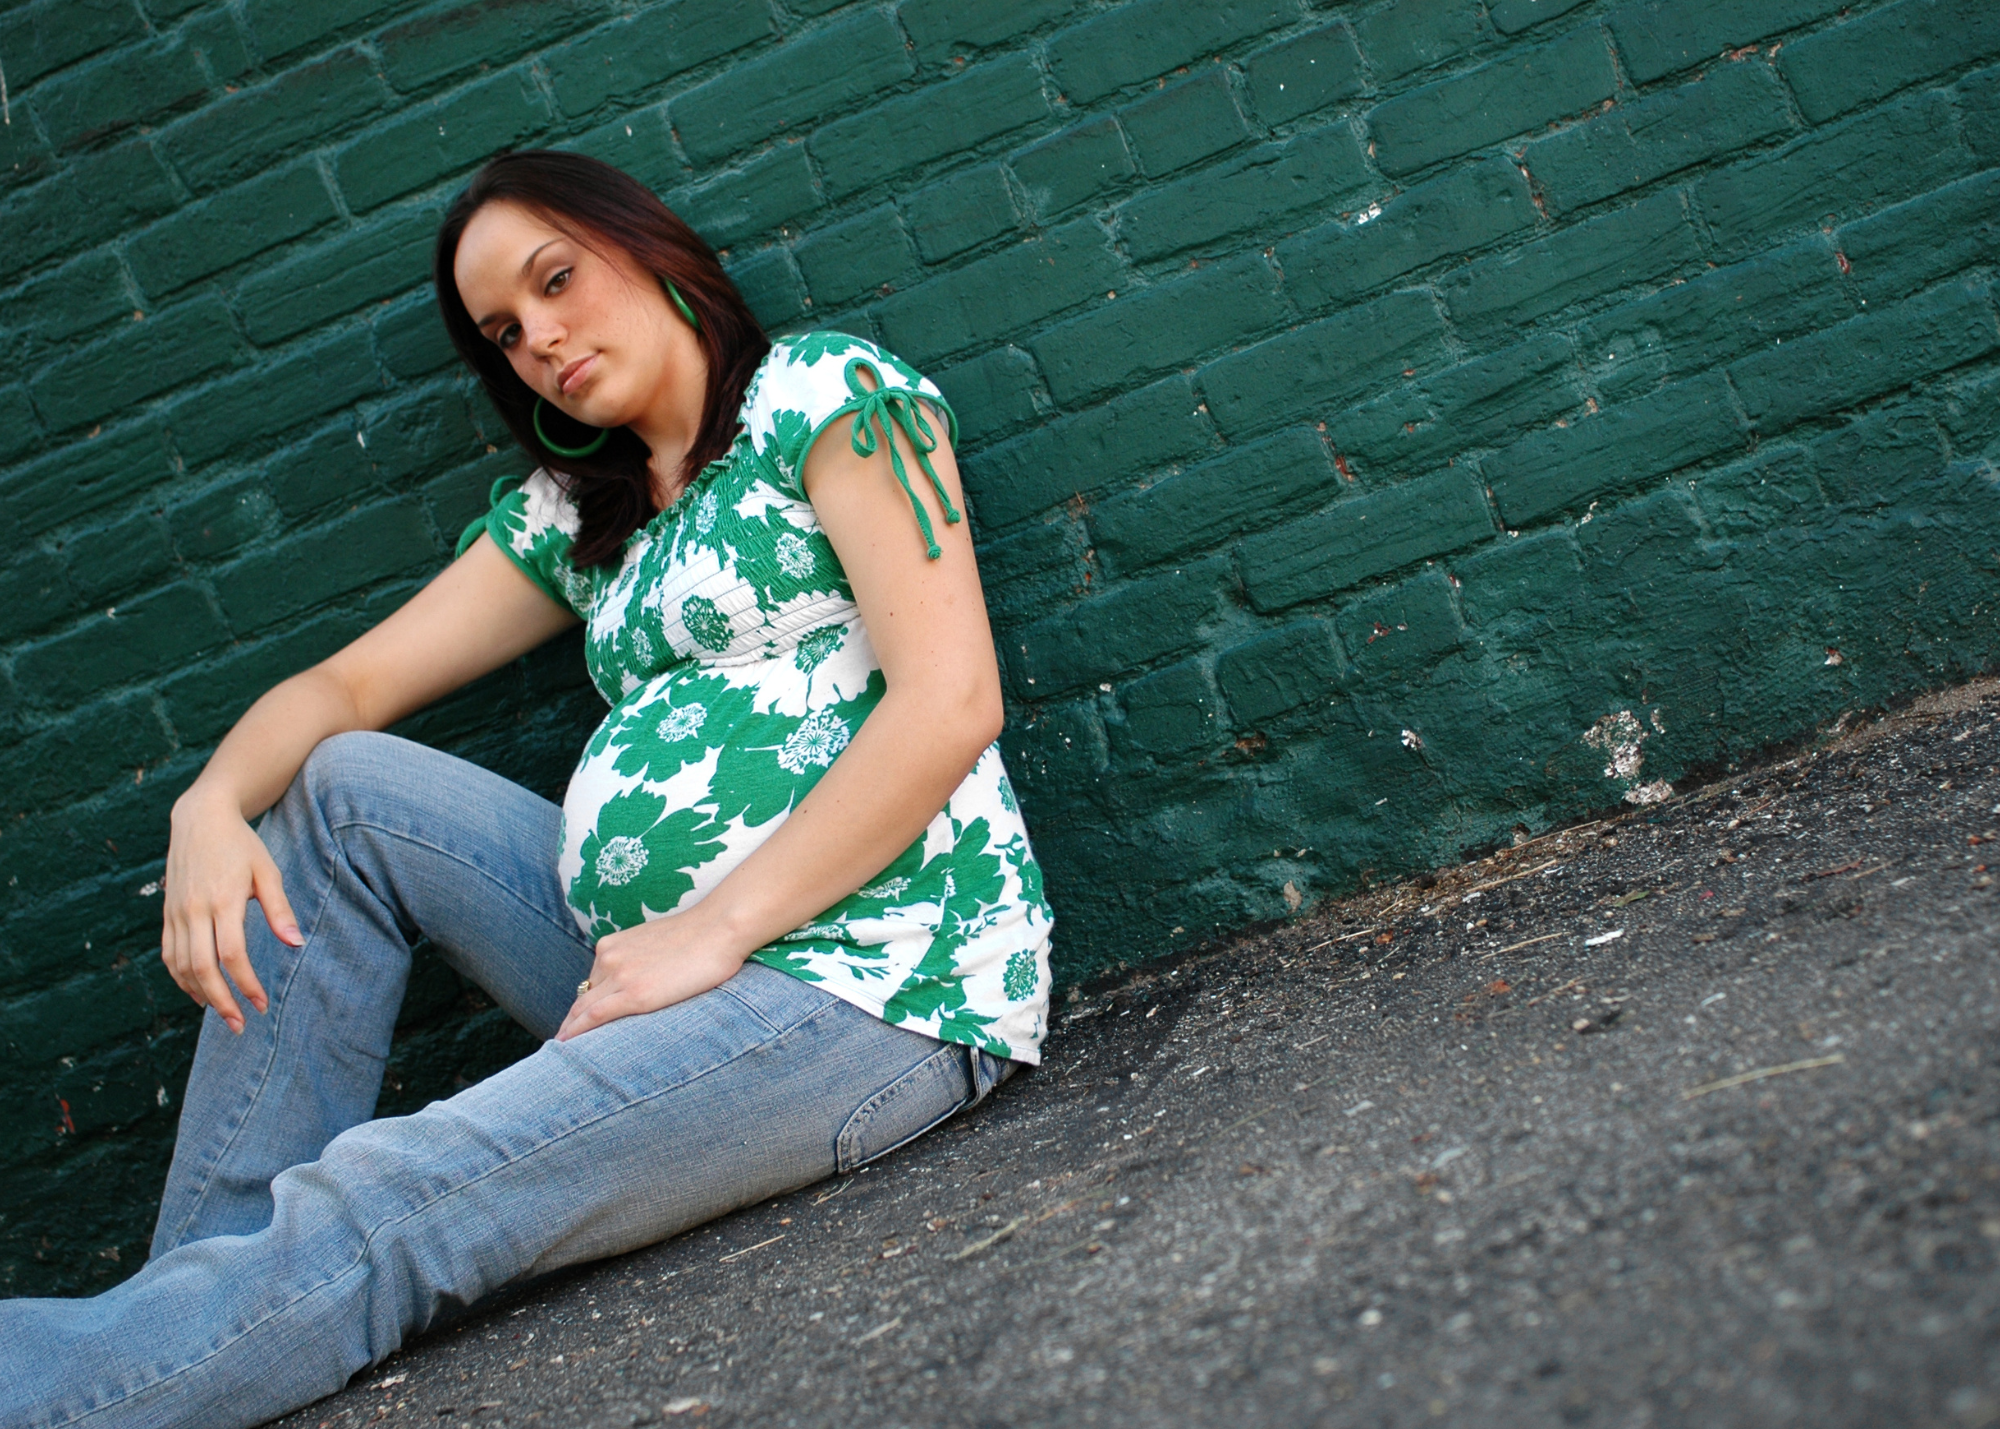 A pregnant person with a round belly leans against a green brick wall. They have shoulder length brown hair and are white. They are wearing a green and white floral top and light coloured jeans.